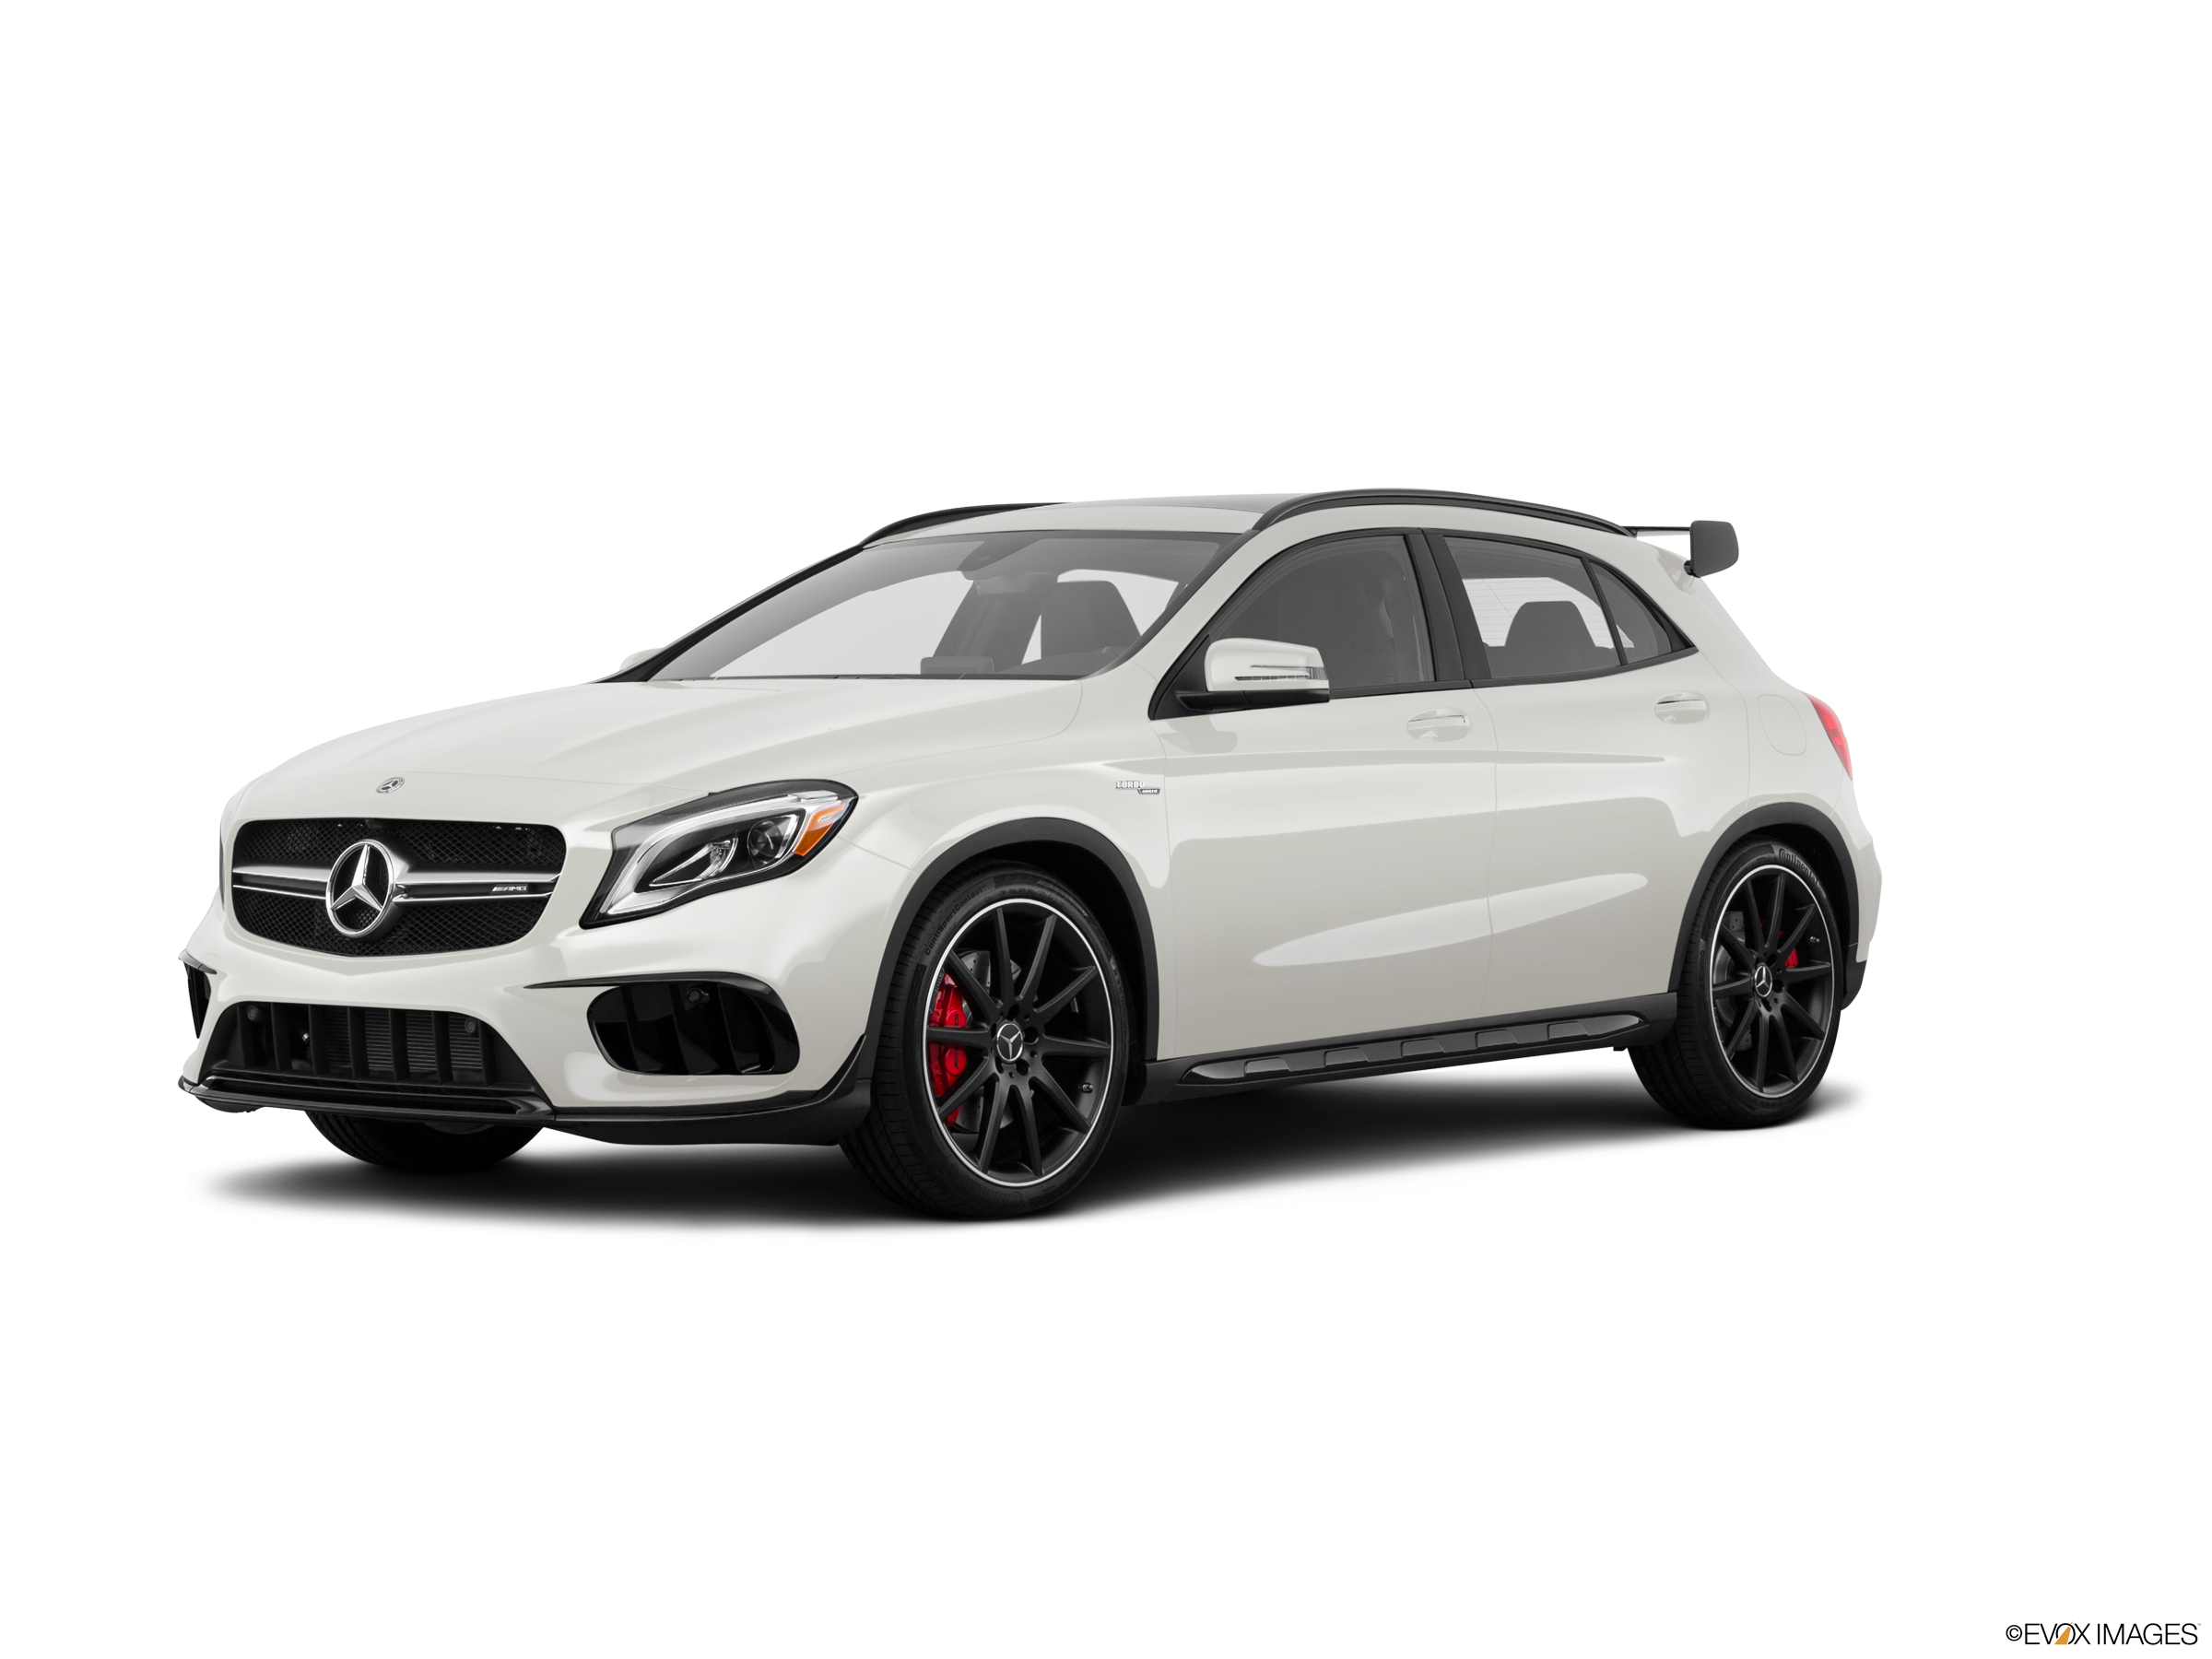 2019 Mercedes Benz Mercedes Amg Gla Prices Reviews Pictures Kelley Blue Book